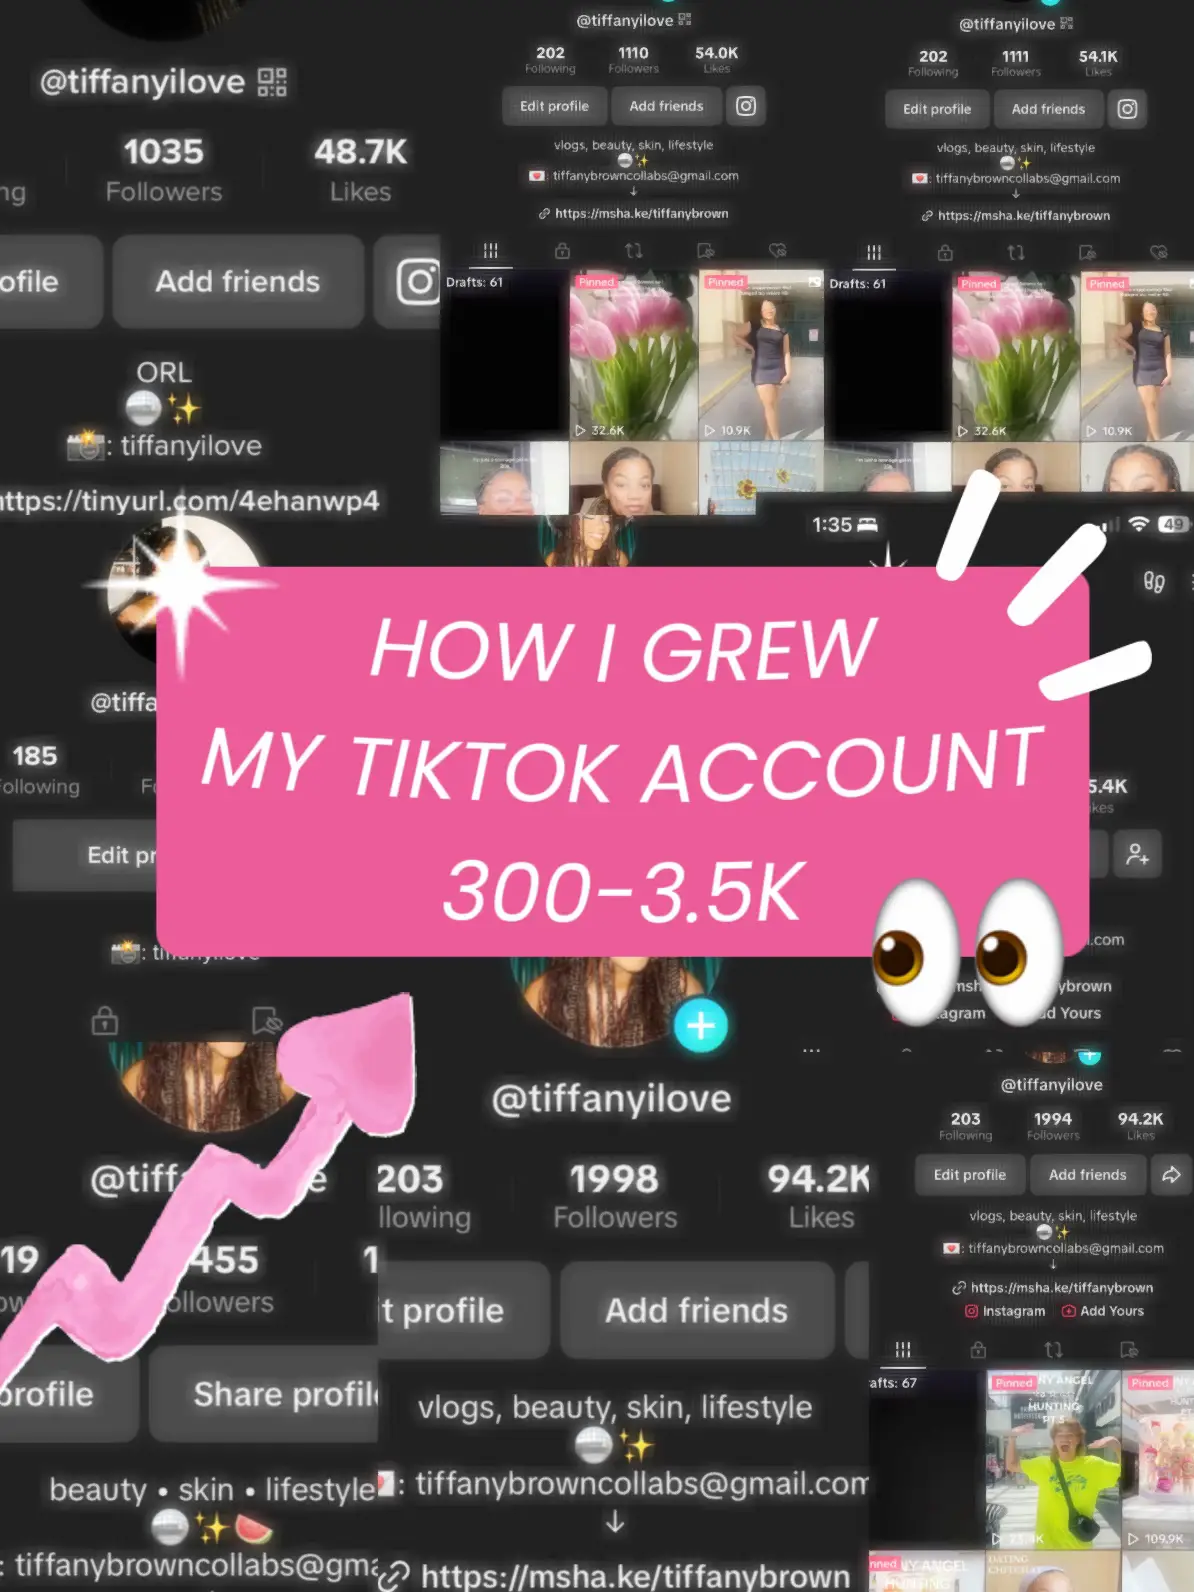 How to GROW your TikTok account✨'s images(0)